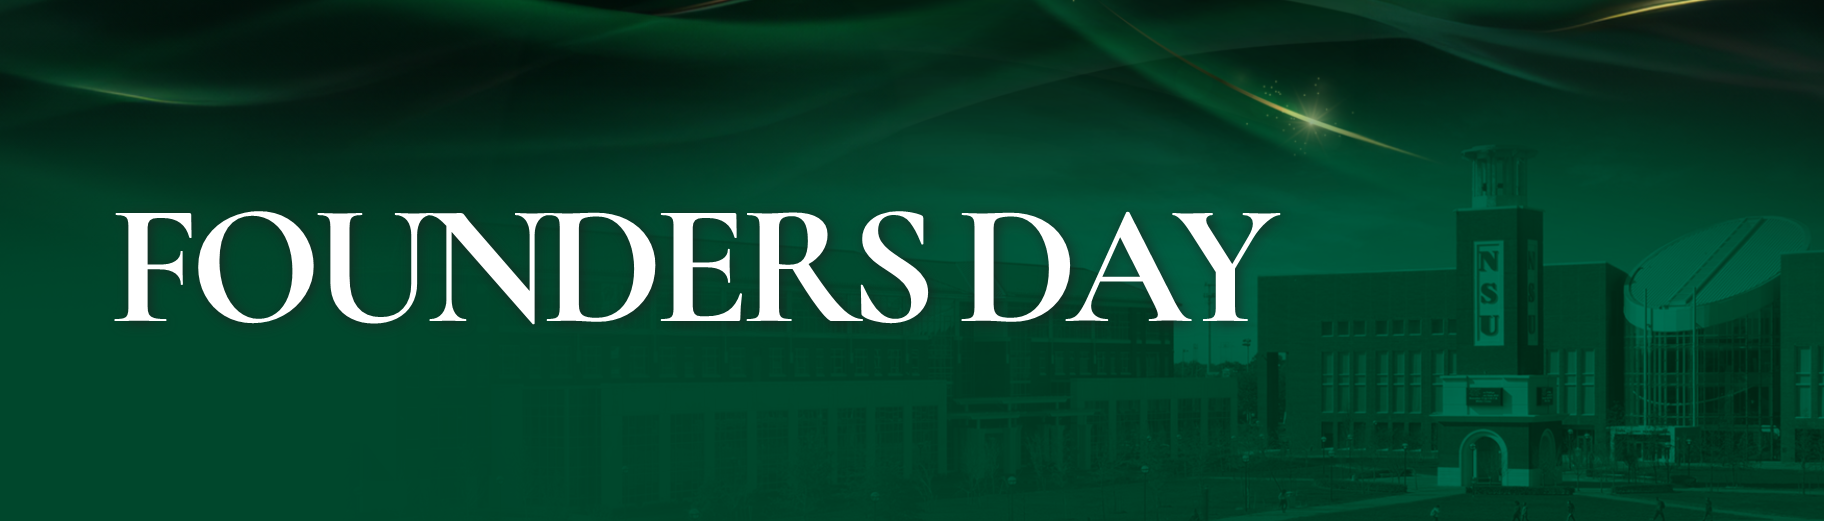 founders day web banner